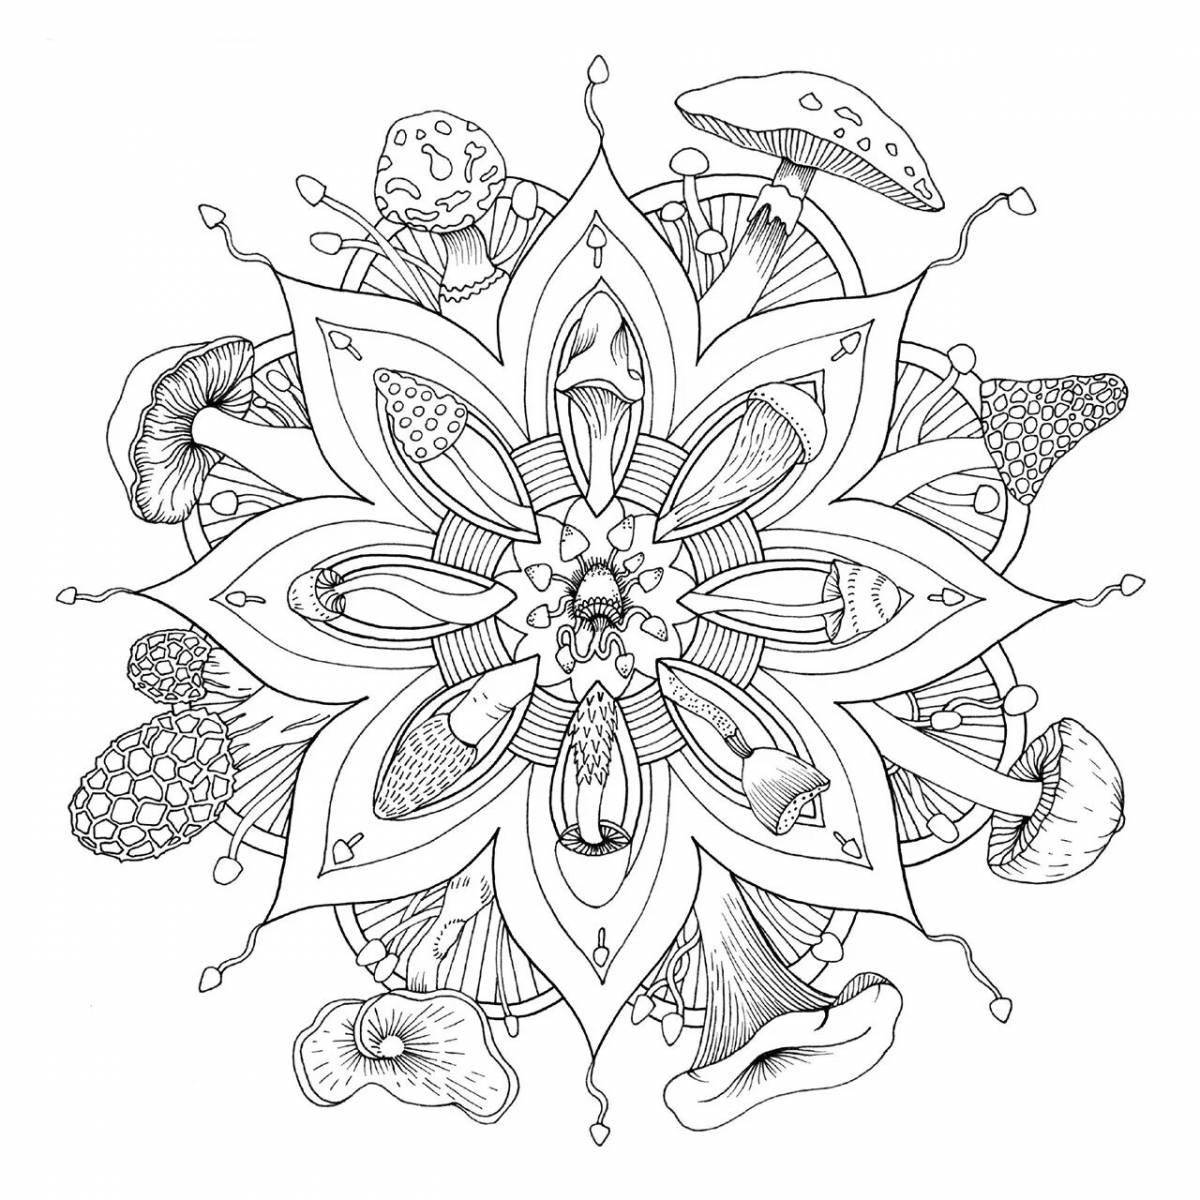 Fun anti-stress coloring book for markers